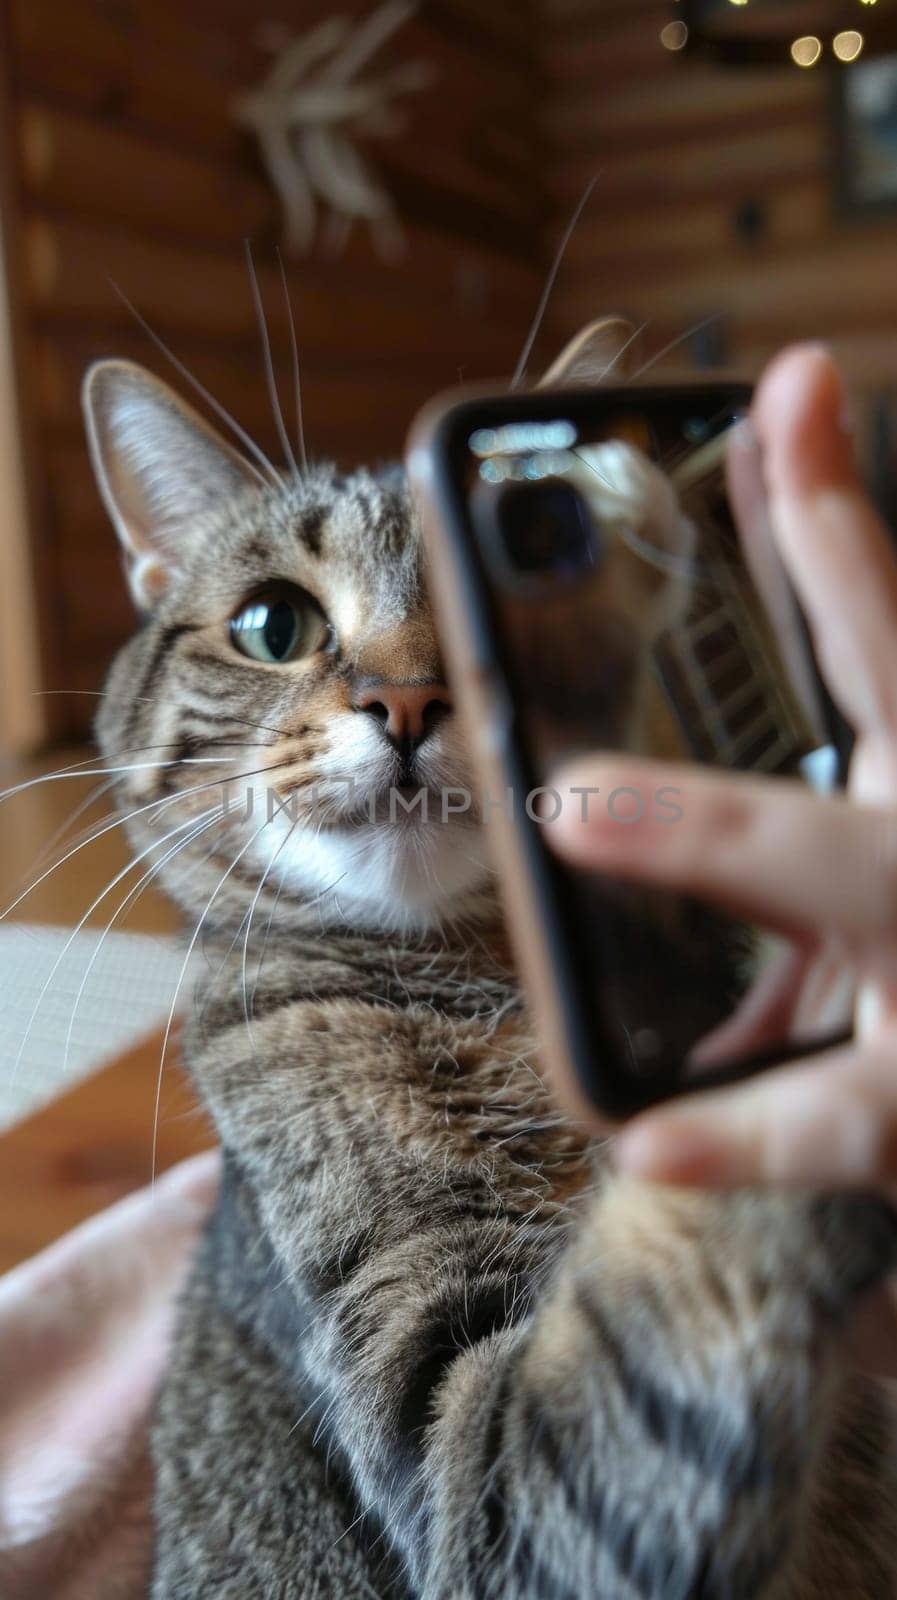 A cat holding a cell phone in its paws while being held by someone